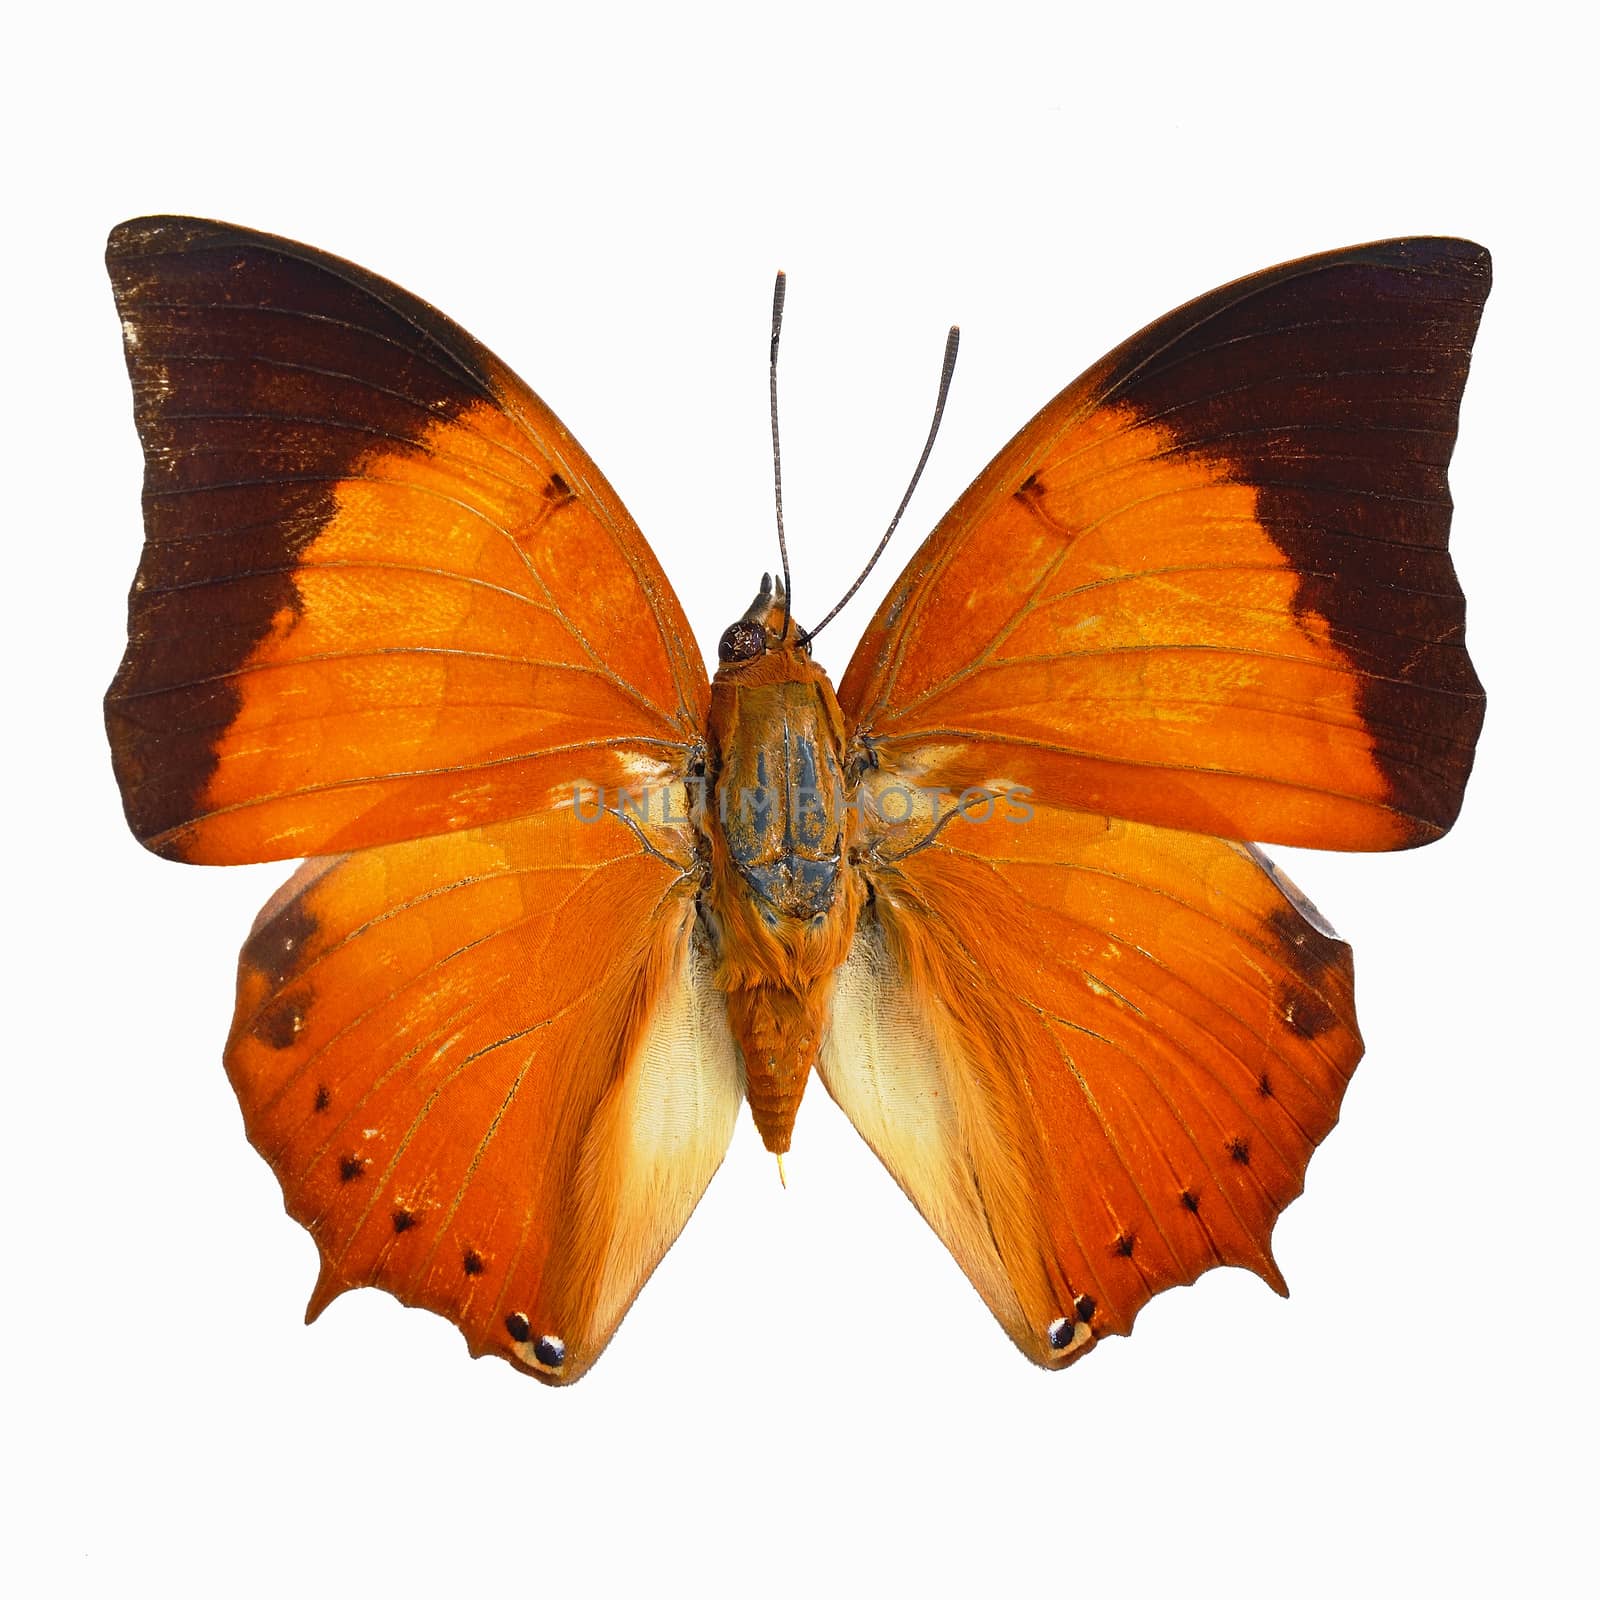 Orange butterfly, Common Tawny Rajah (Charaxes bemardus), isolated on white background